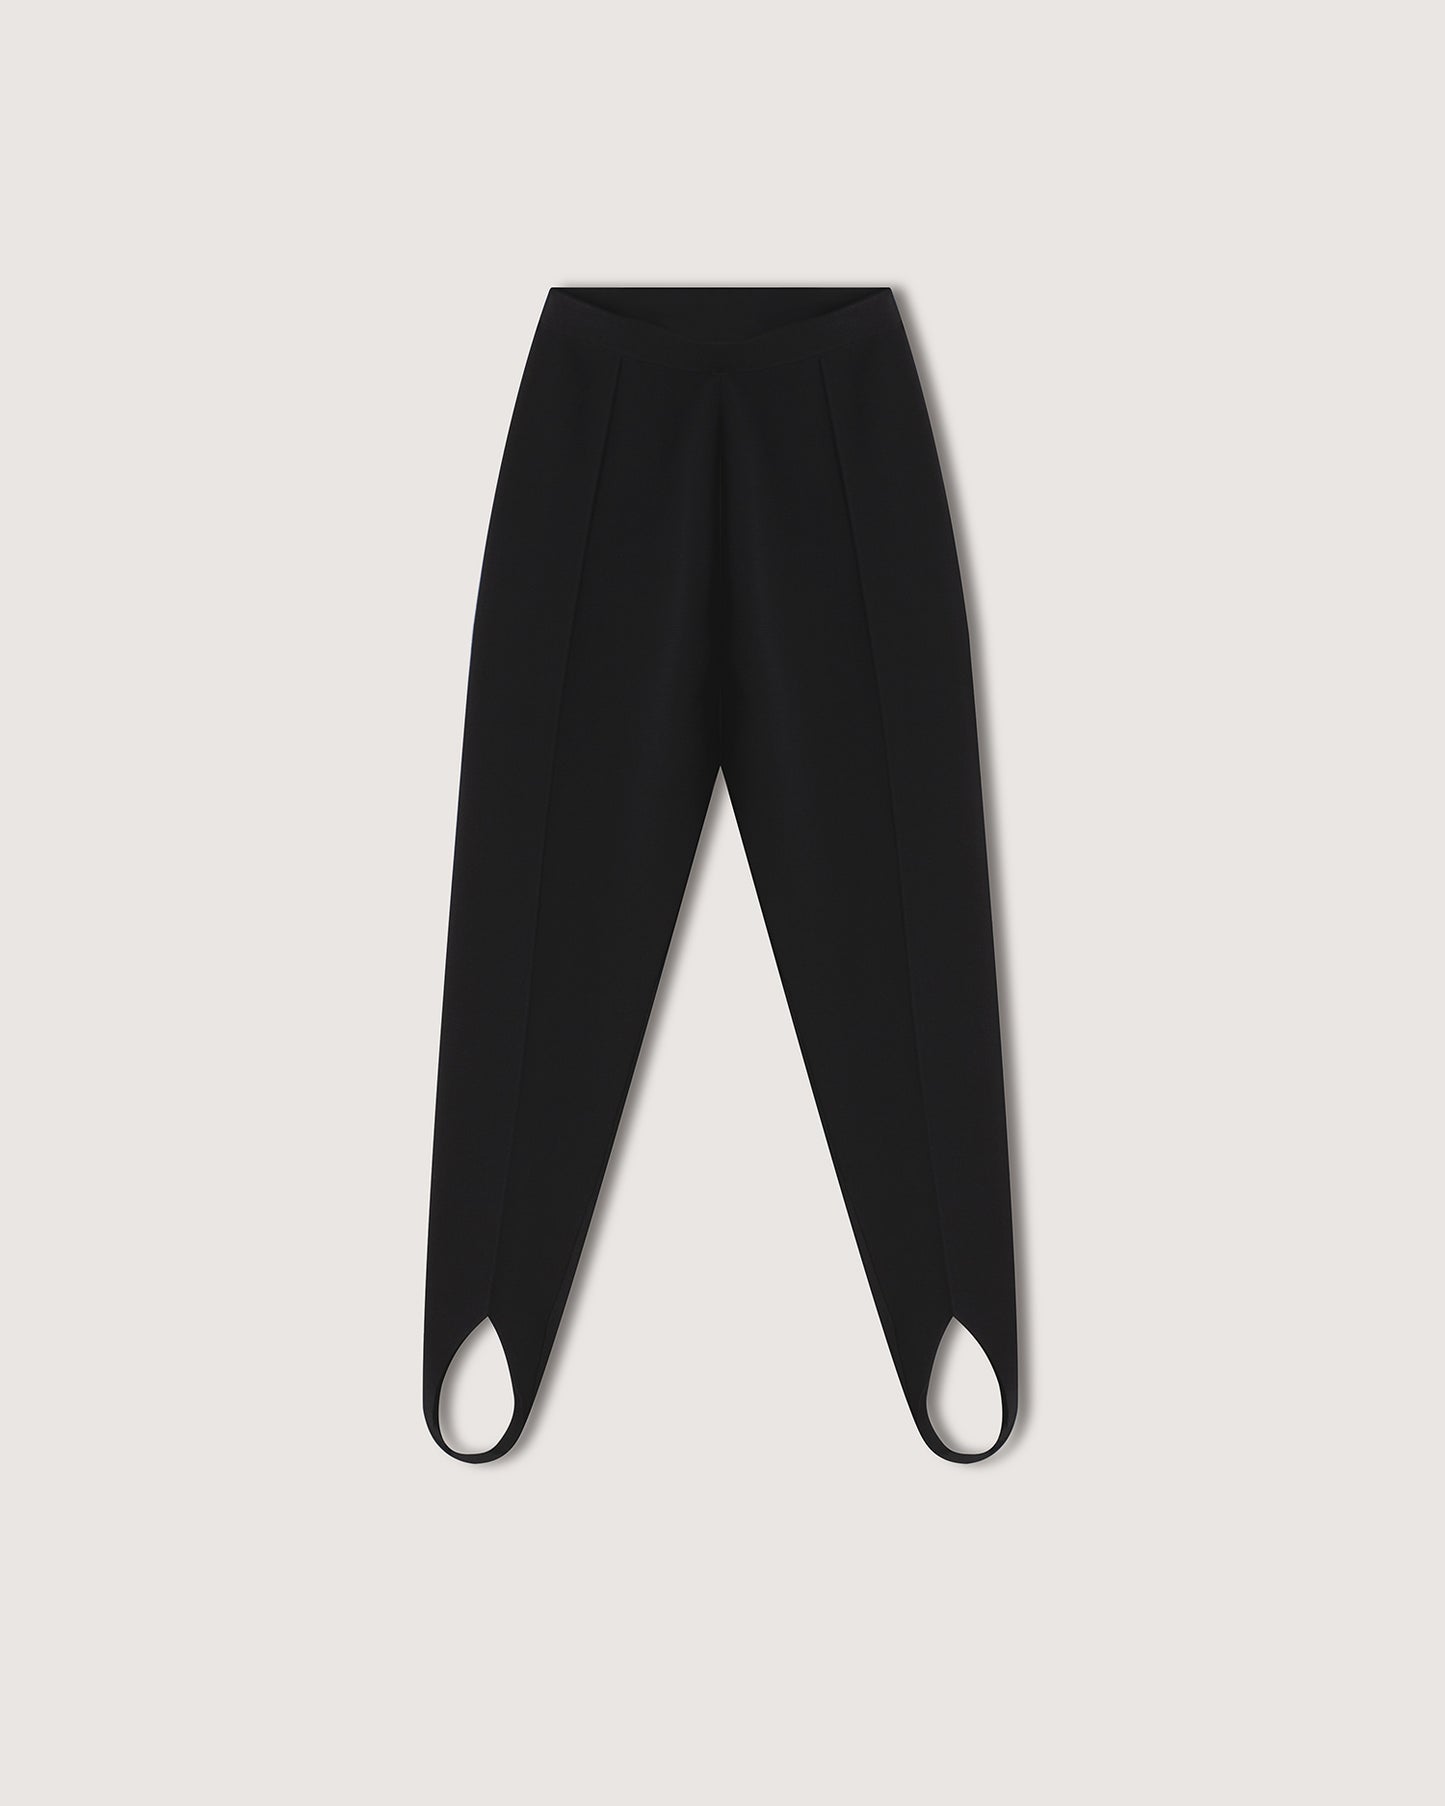 Lia - Archive Knitted Stirrup Pants - Black